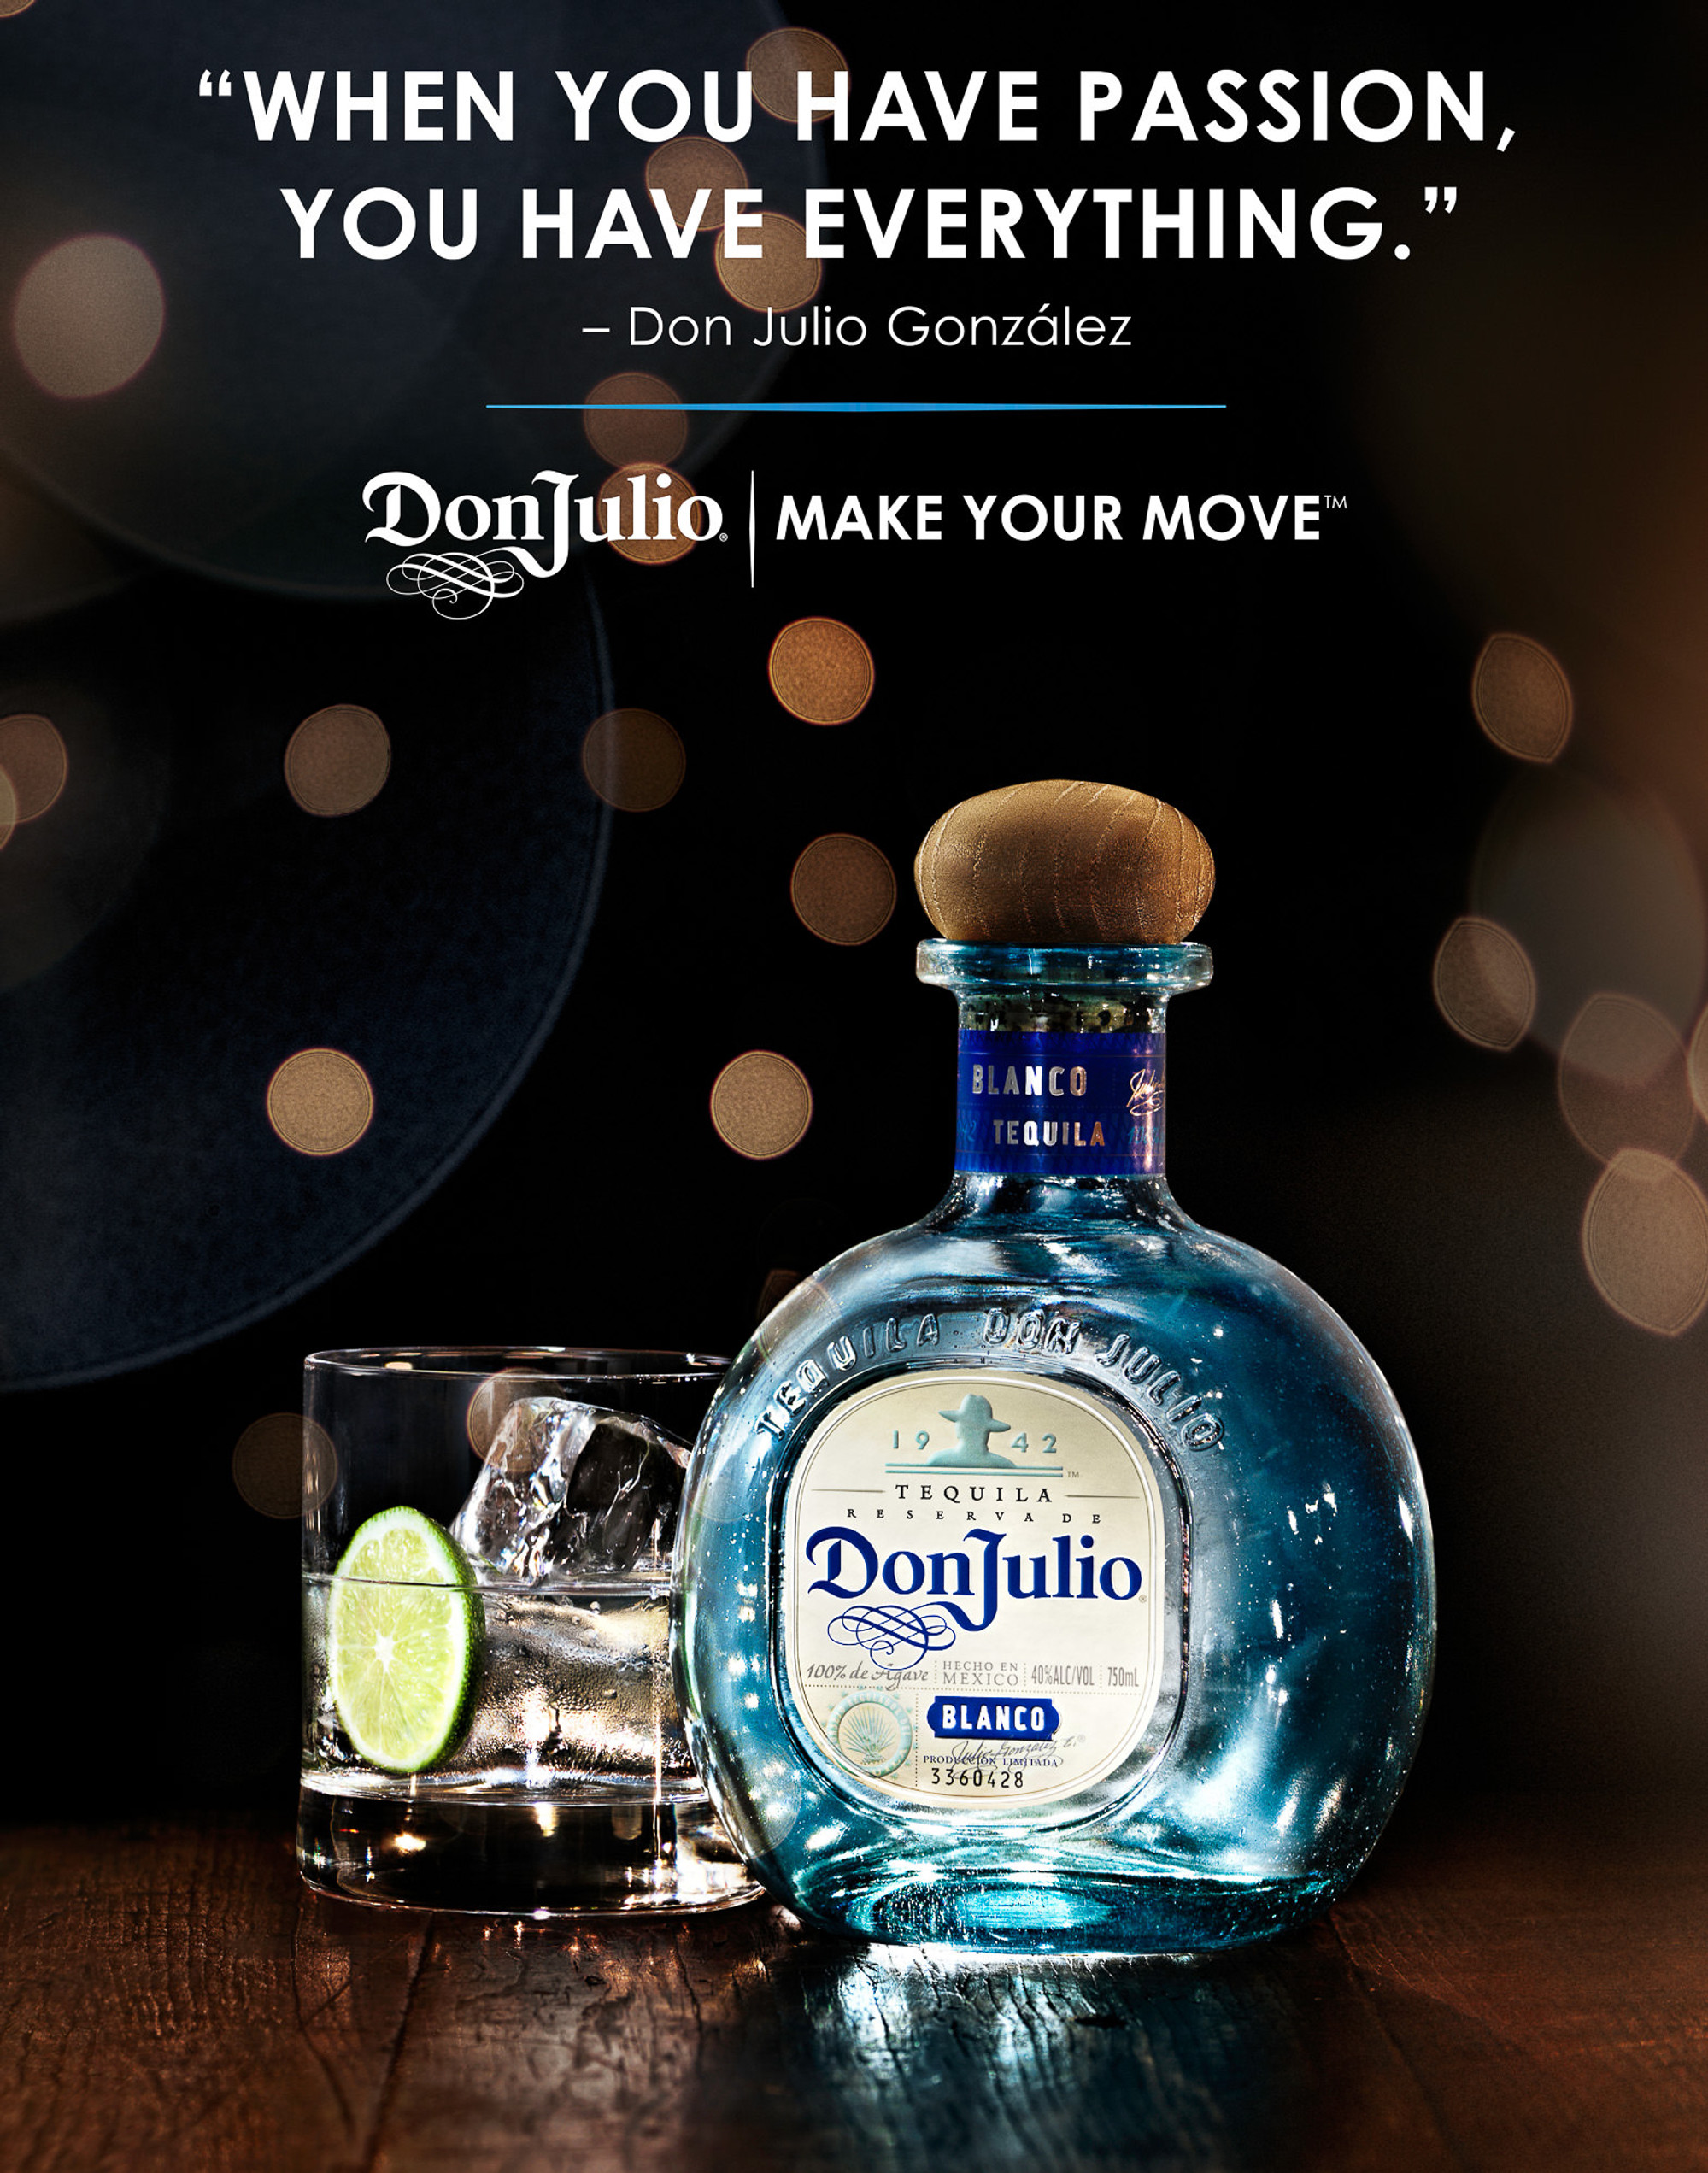 Don Julio Tequila blanco lights tear sheet. Beverages and liquids product & advertising photography by Timothy Hogan Studio in Los Angeles